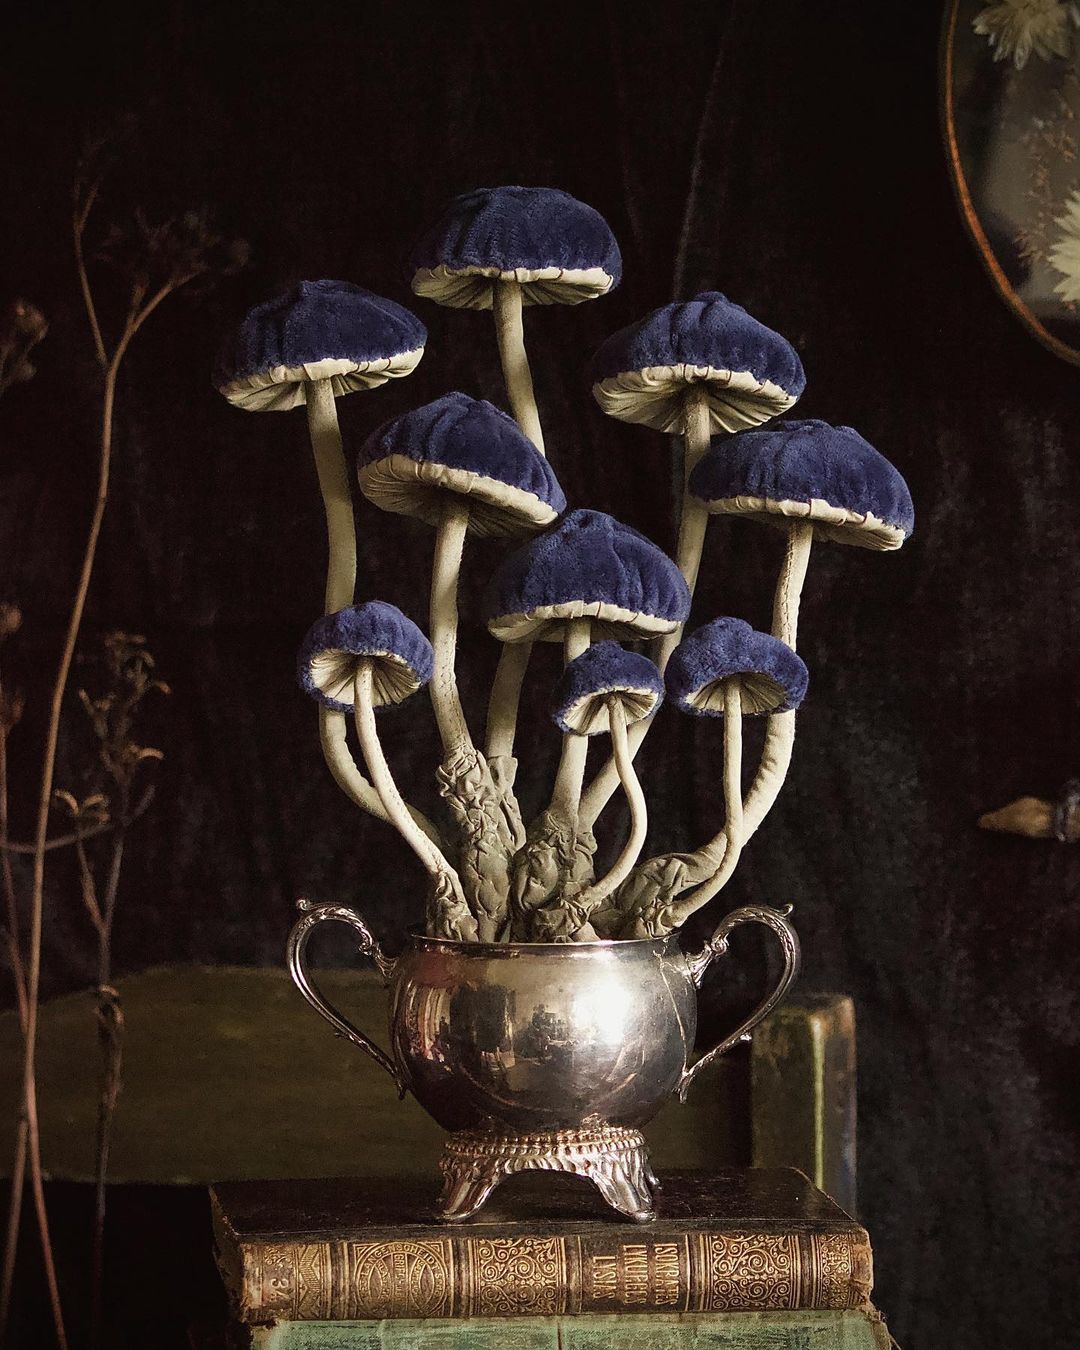 Witchy Mushrooms The Beautifully Nature Inspired Textile And Fiber Art Of Adrianna Eve 7